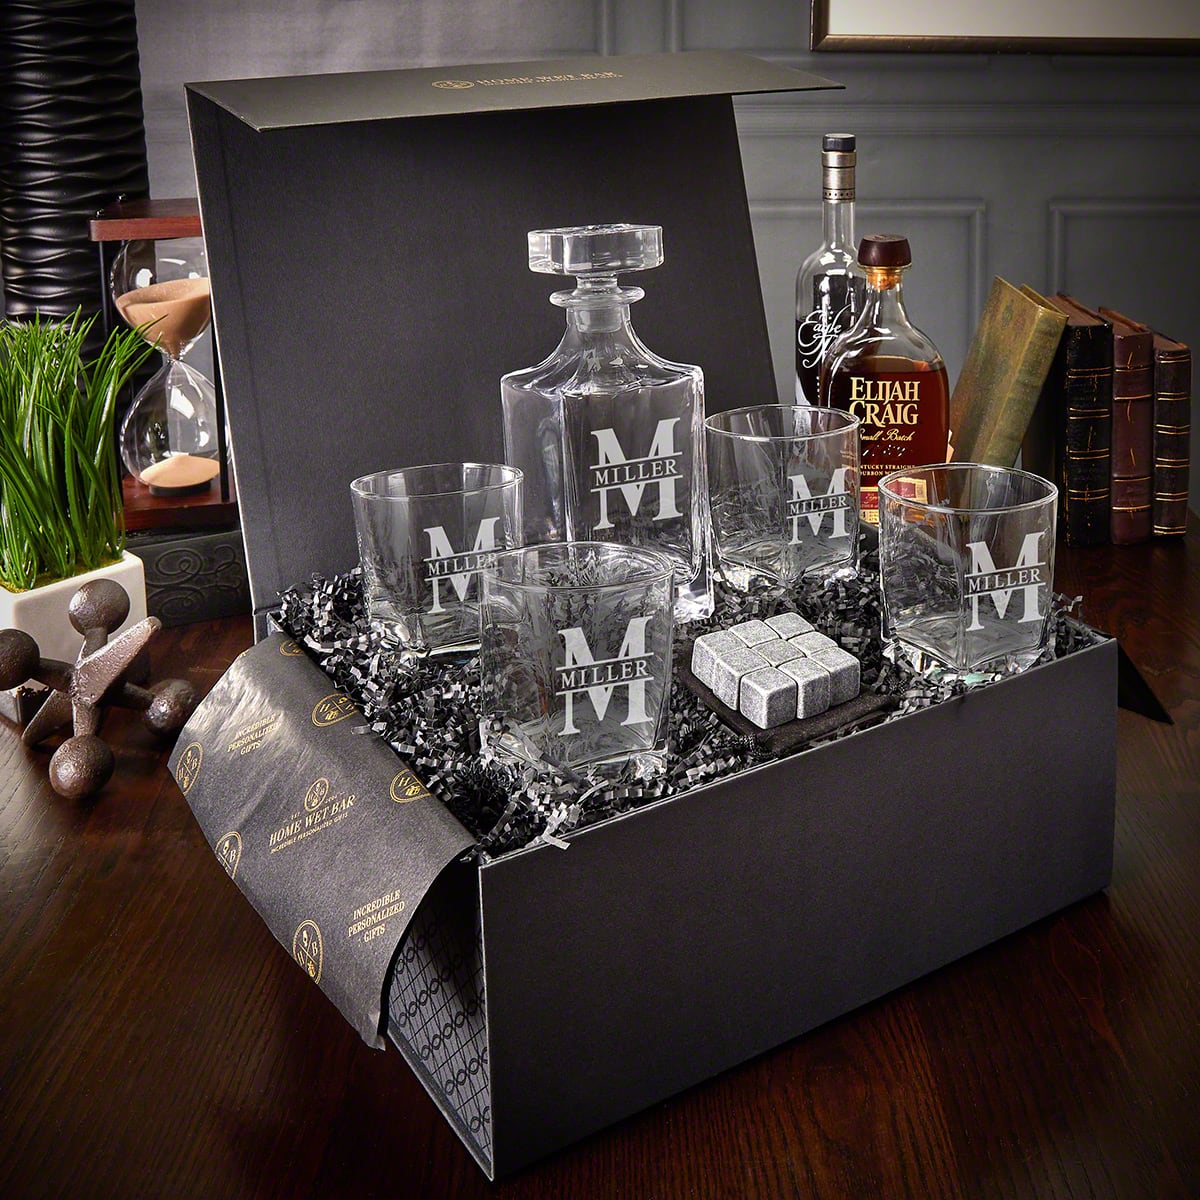 Engraved Whisky Decanter Set with Luxury Box - 7pc 